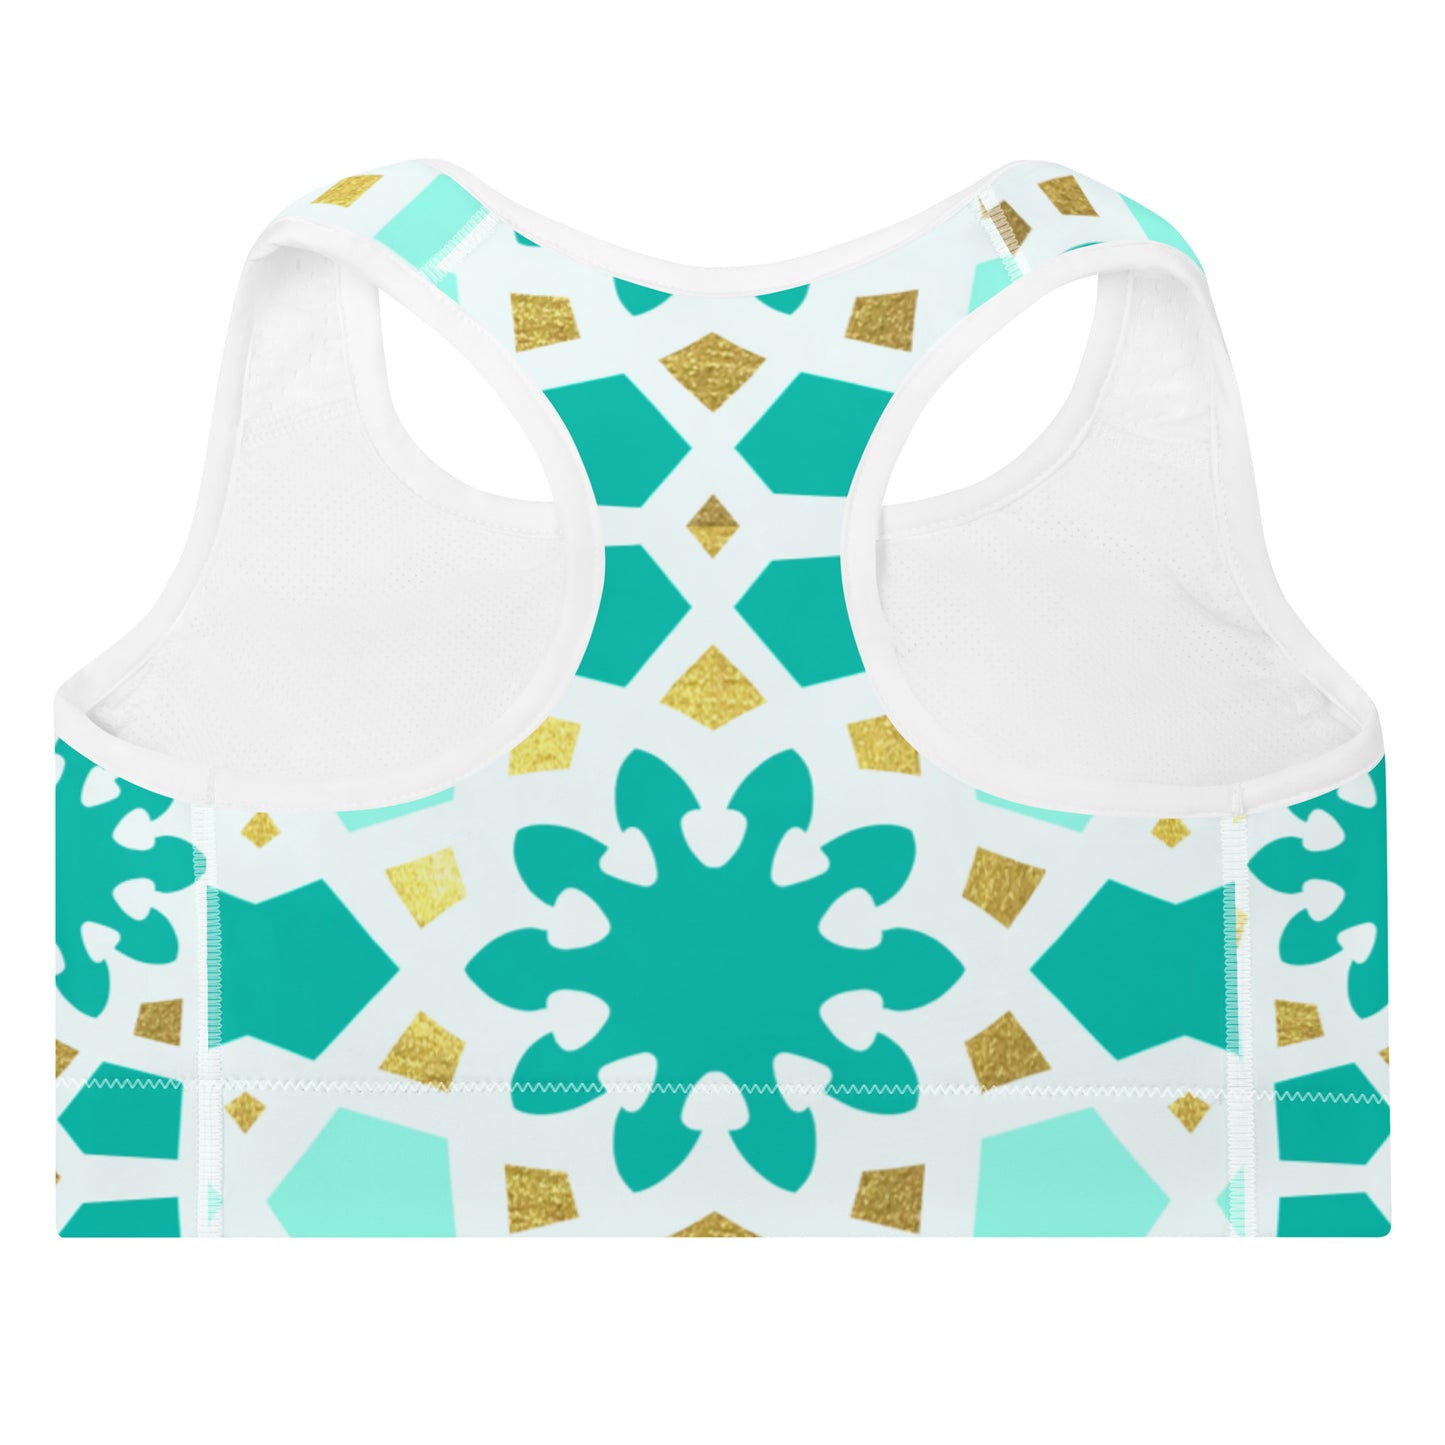 Padded Sports Bra - Geometric Arabesque Pattern in Mint and Gold